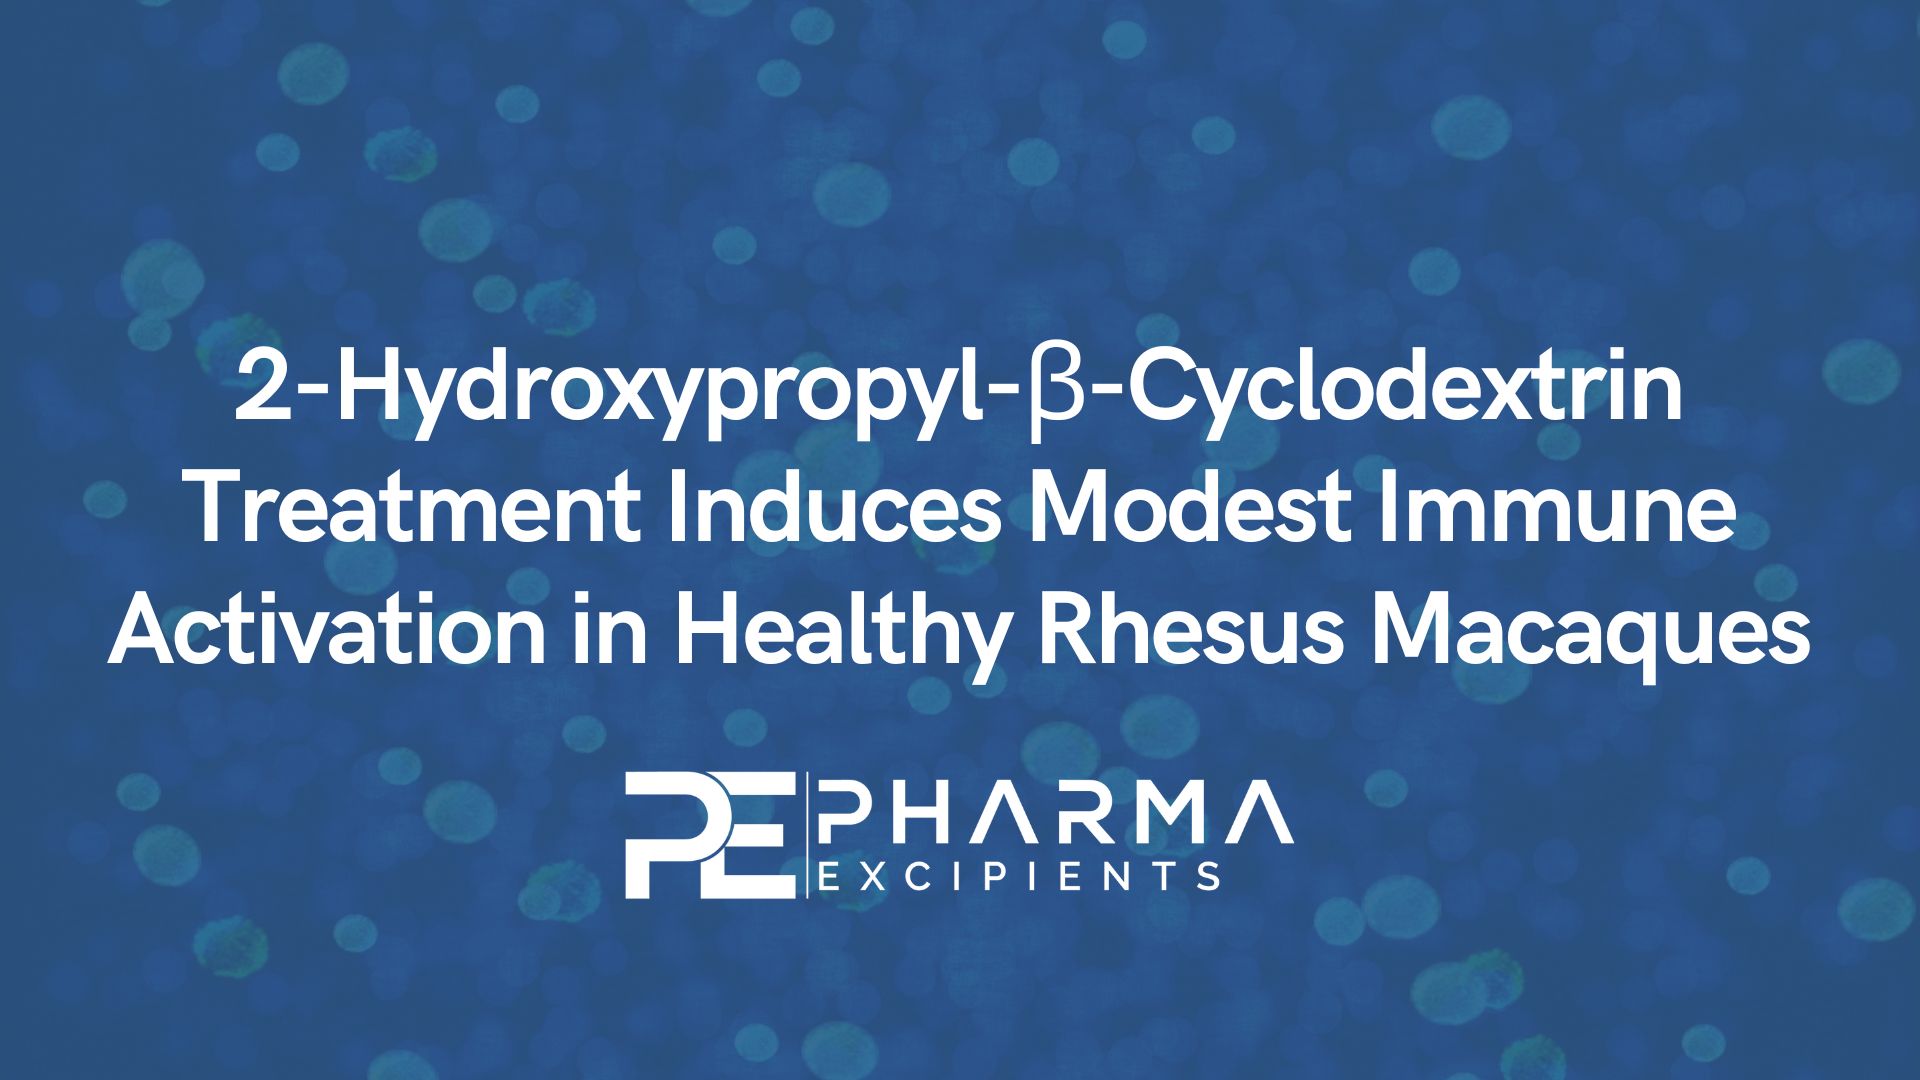 2-Hydroxypropyl-β-Cyclodextrin Treatment Induces Modest Immune Activation in Healthy Rhesus Macaques